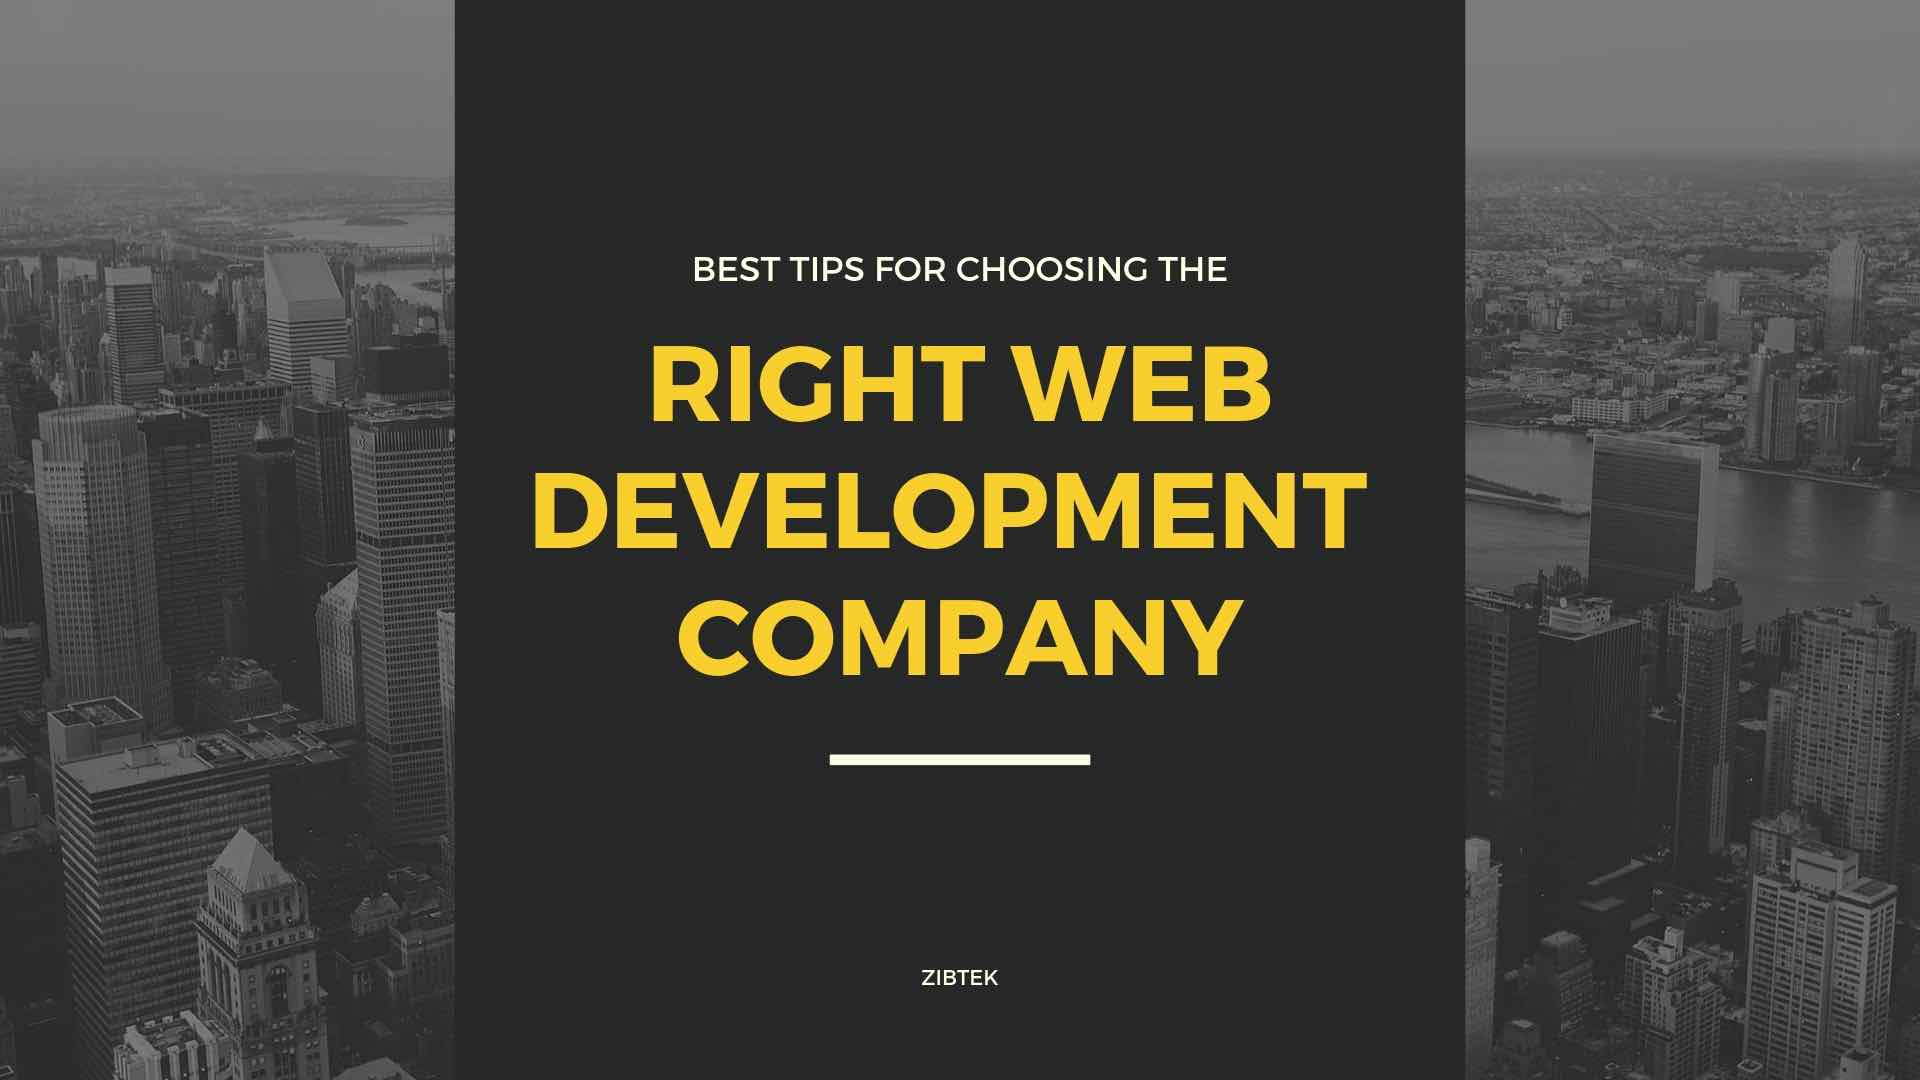 Best Tips For Choosing the Right Web Development Company